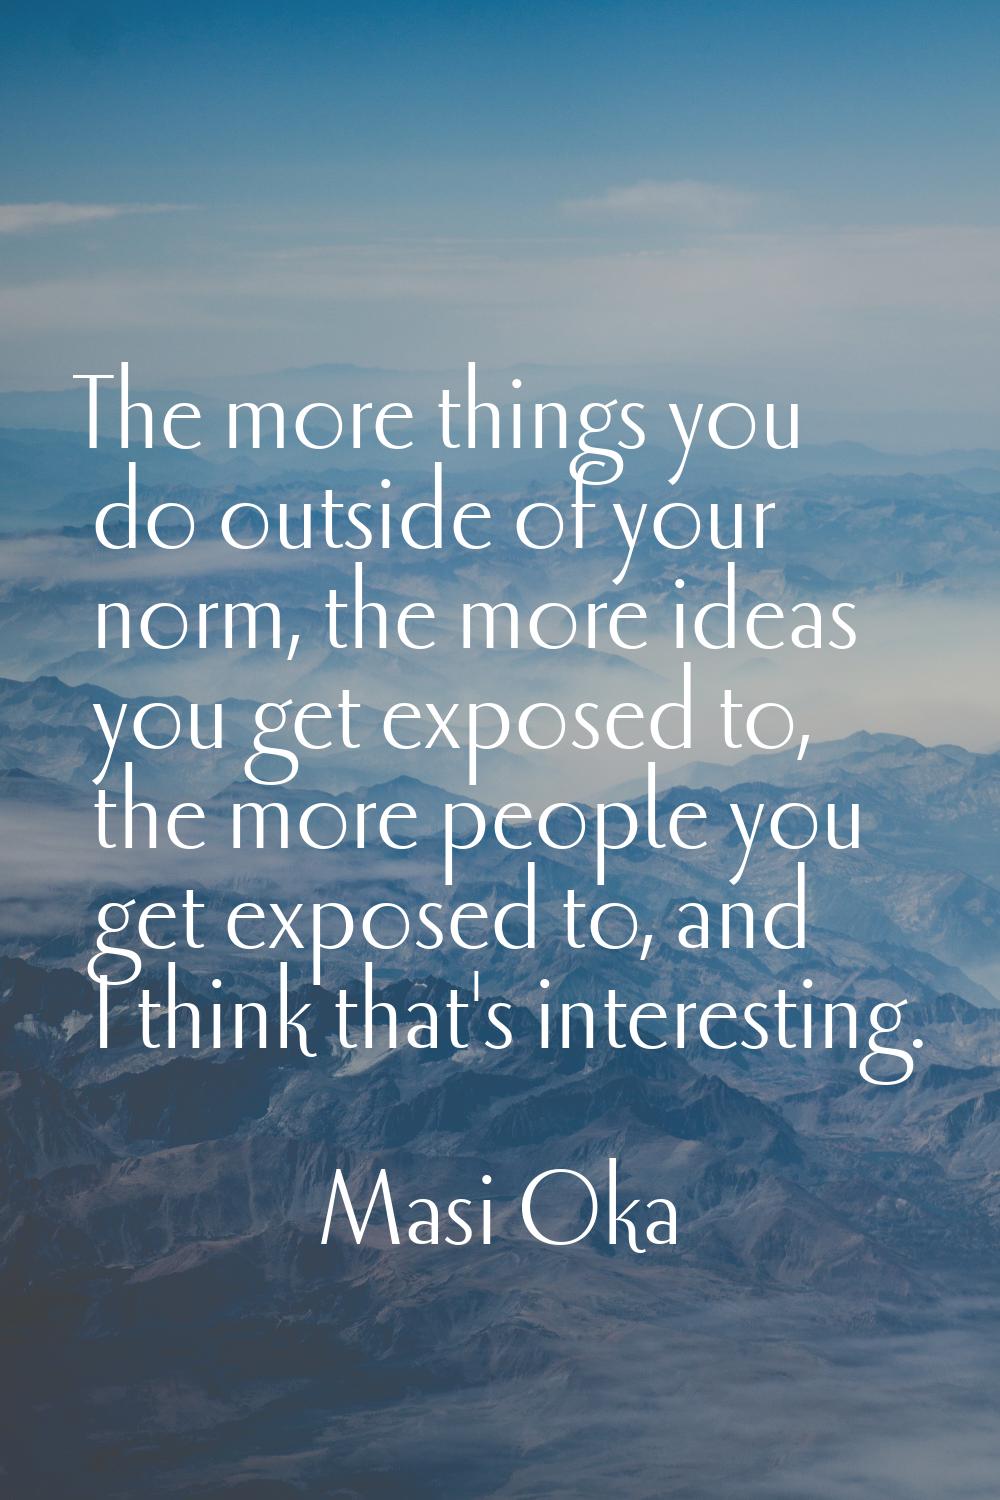 The more things you do outside of your norm, the more ideas you get exposed to, the more people you